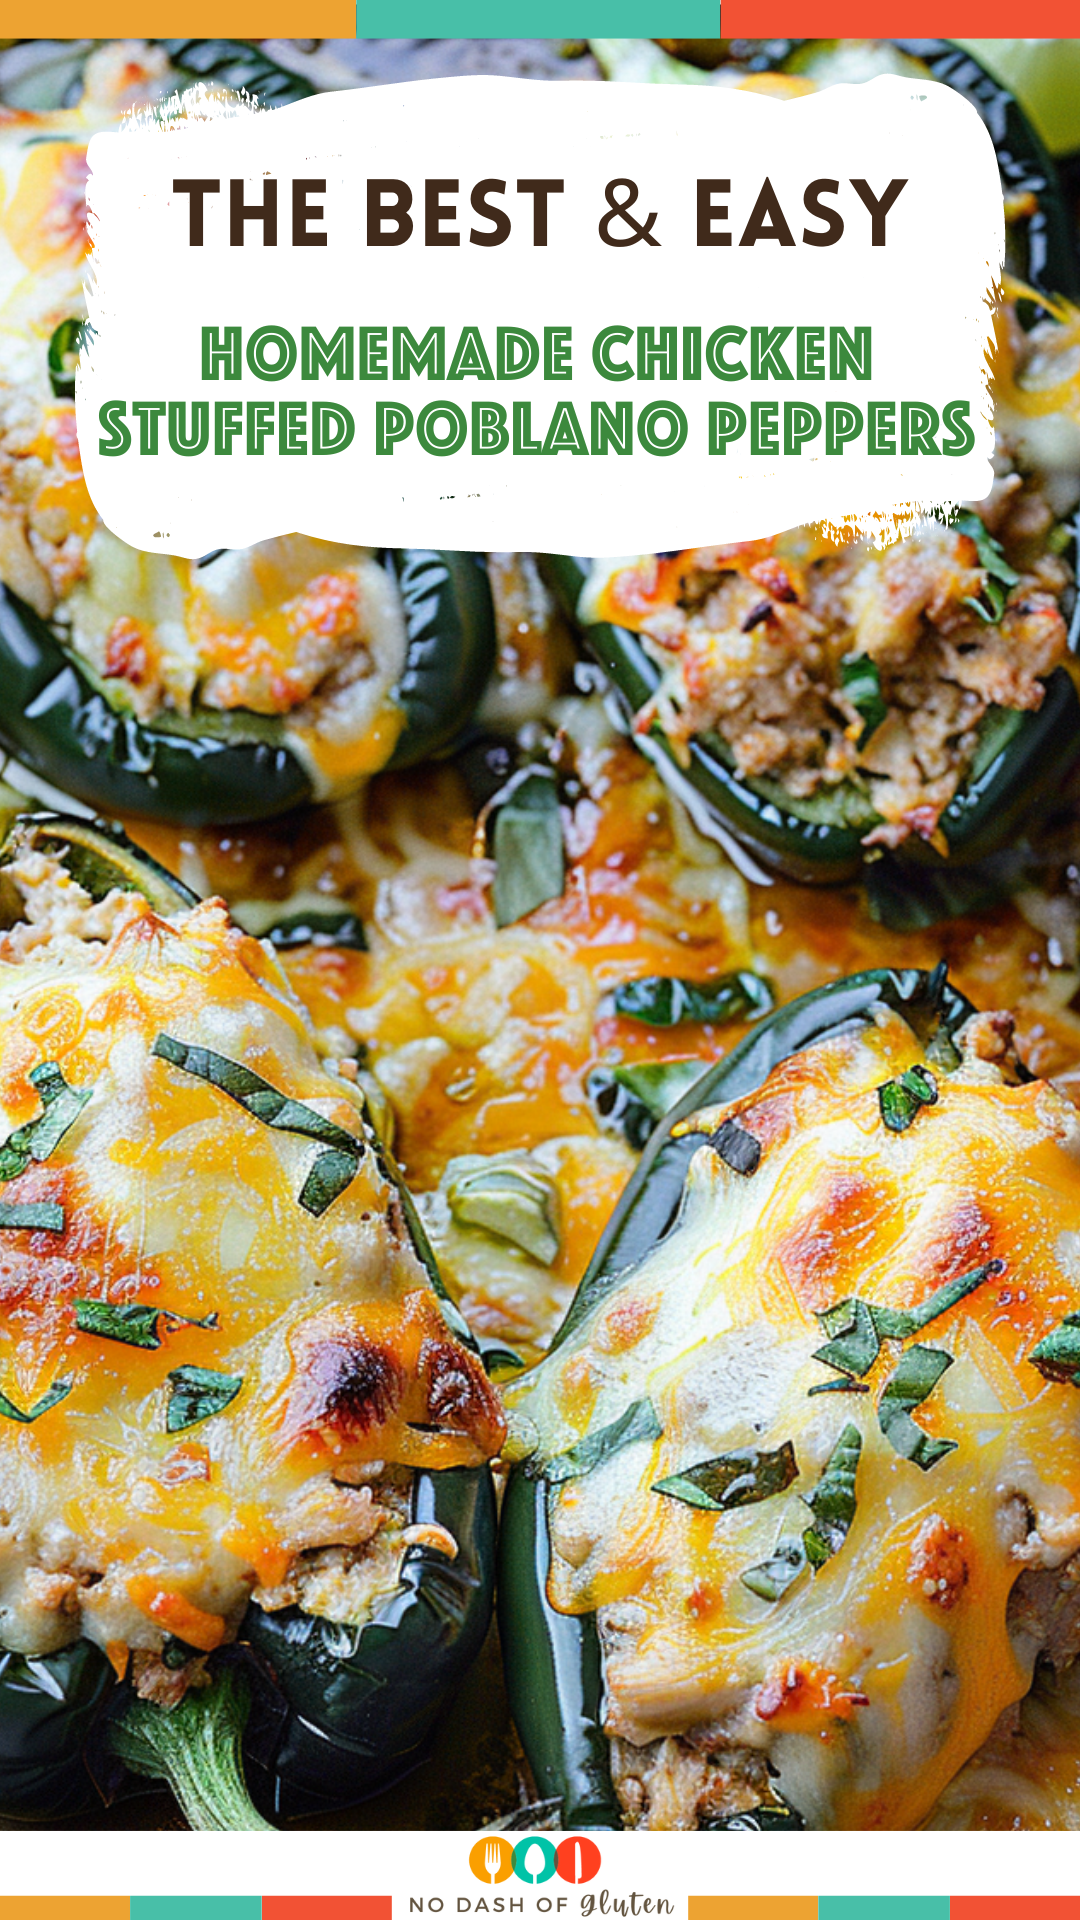 Homemade Chicken Stuffed Poblano Peppers